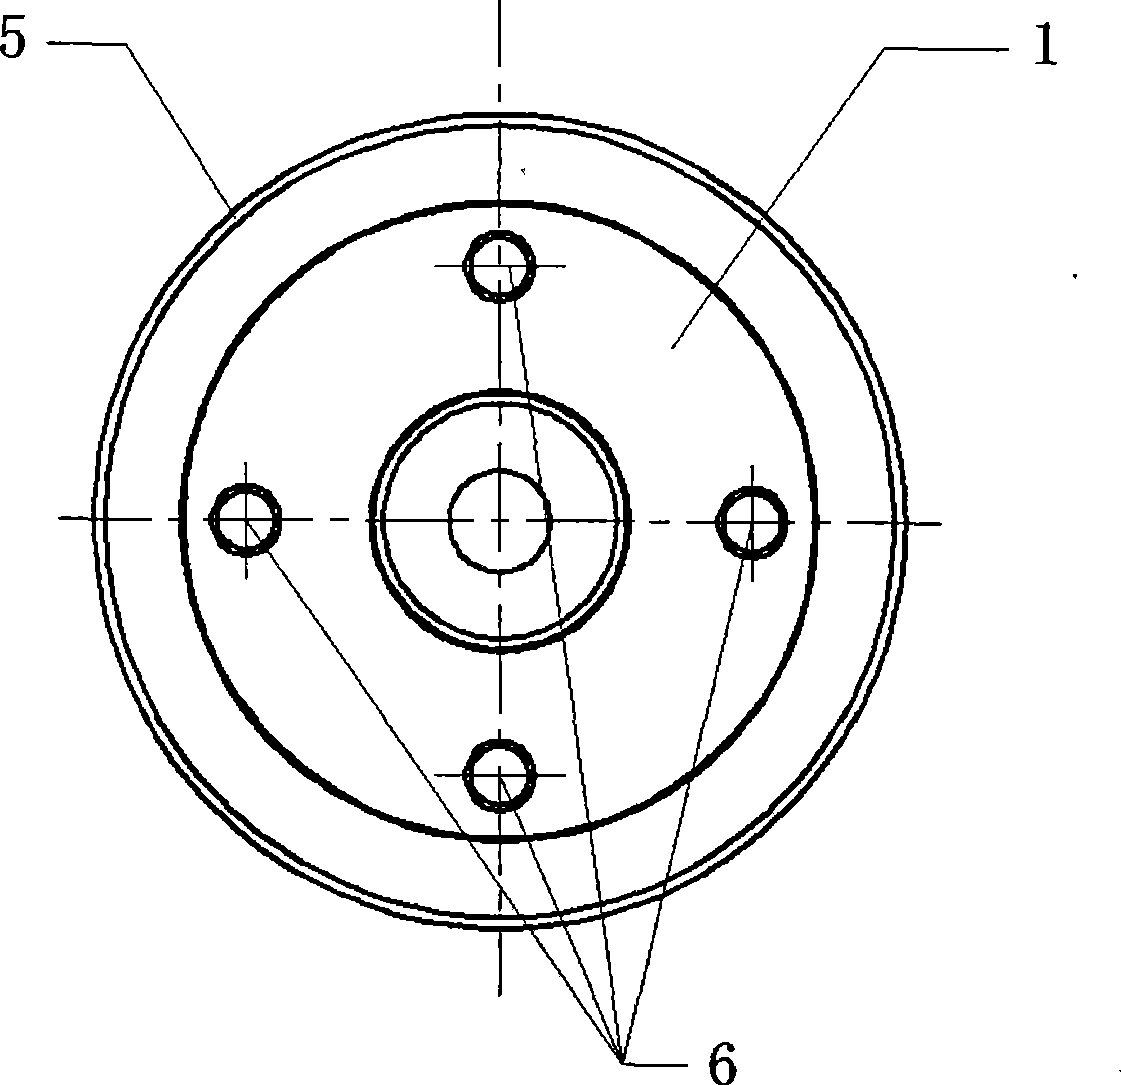 Torsion vibration damper used for main reducing gear